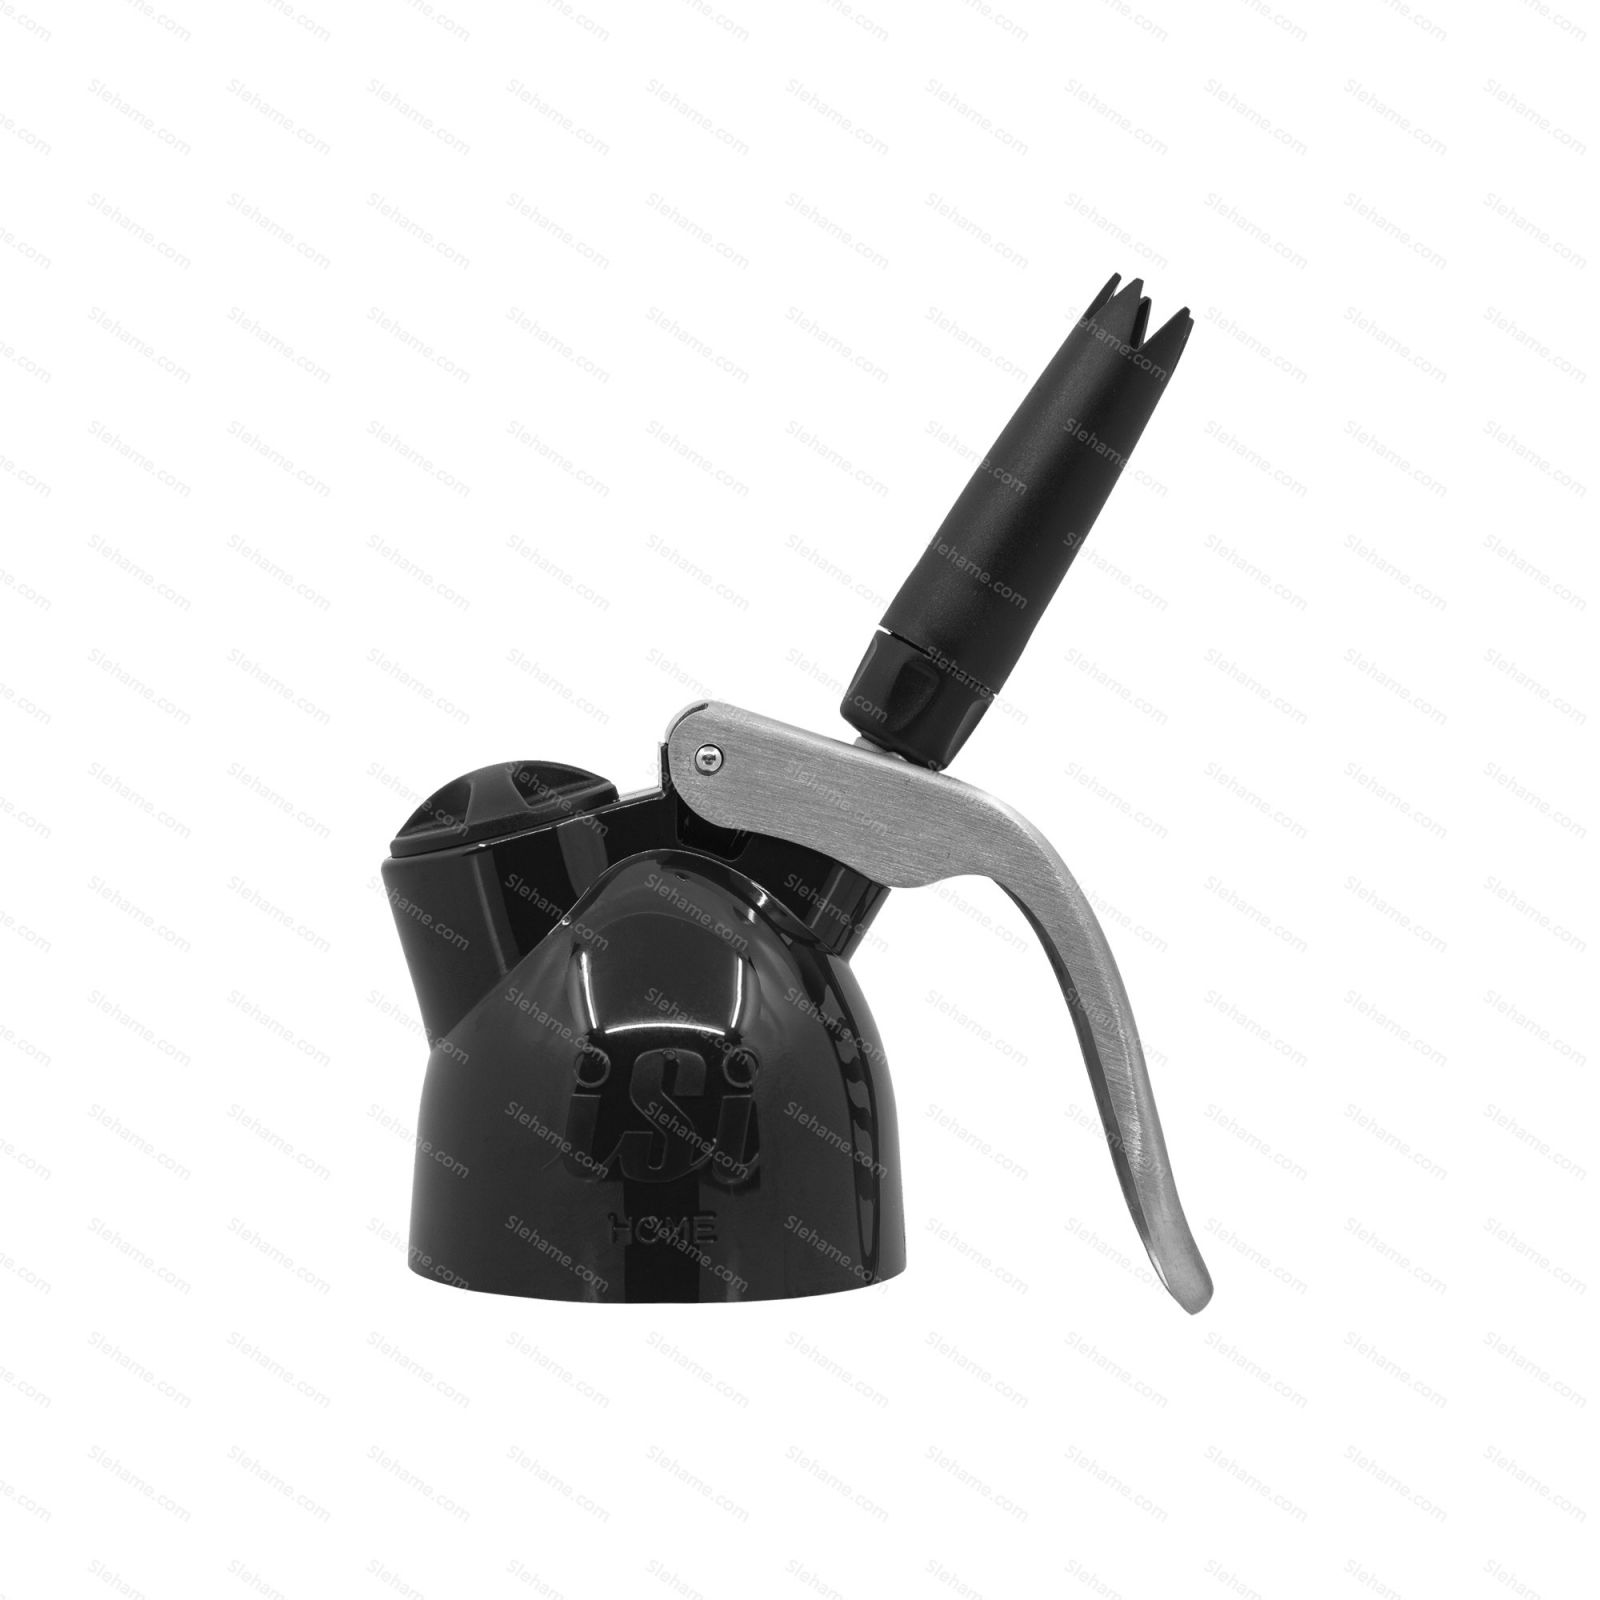 Replacement head iSi DESSERT WHIP PLUS, black - front view